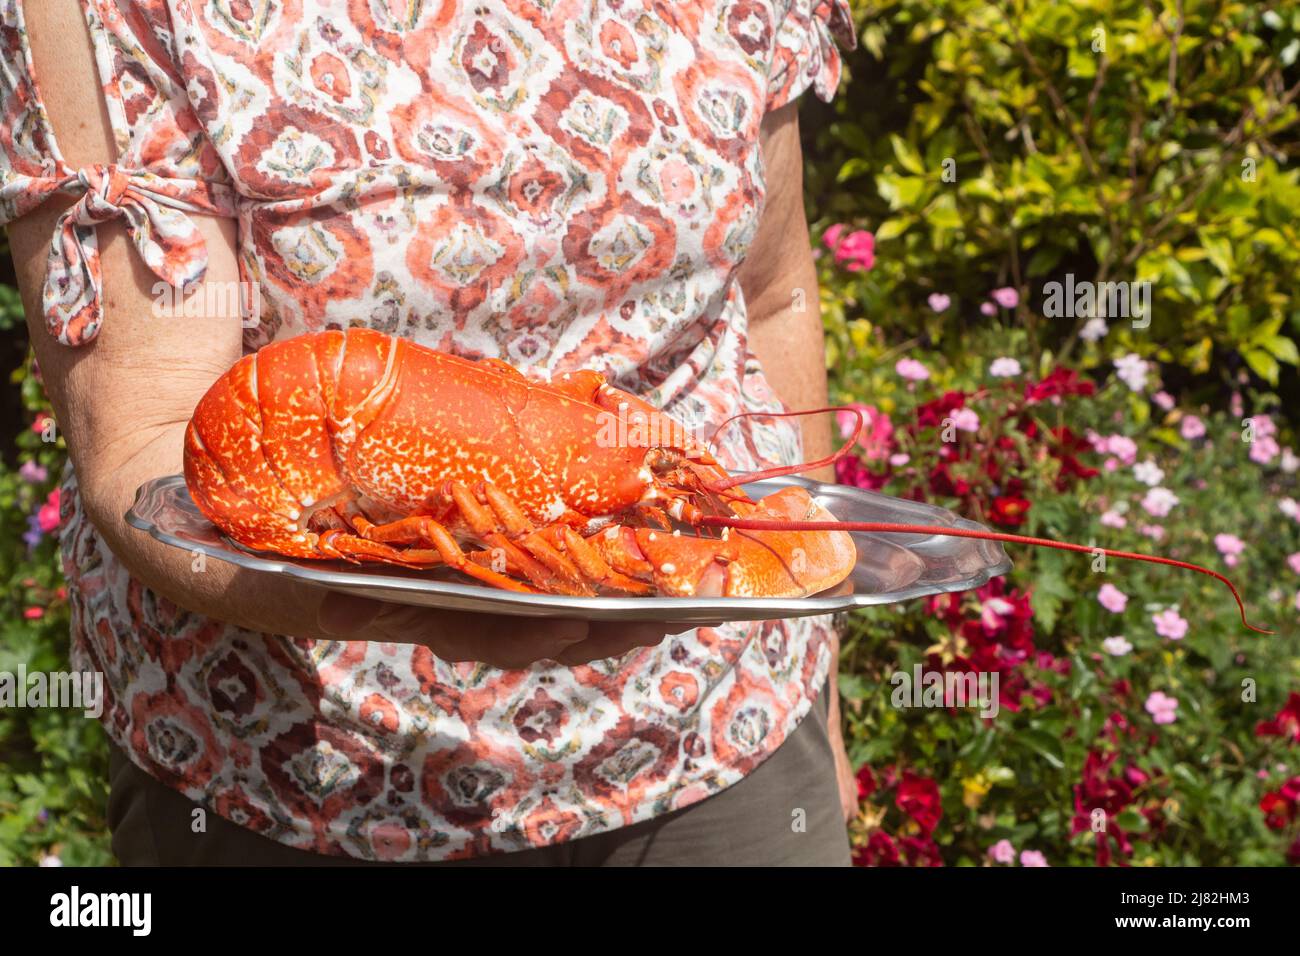 Cooked lobster on a plate served by a woman Stock Photo